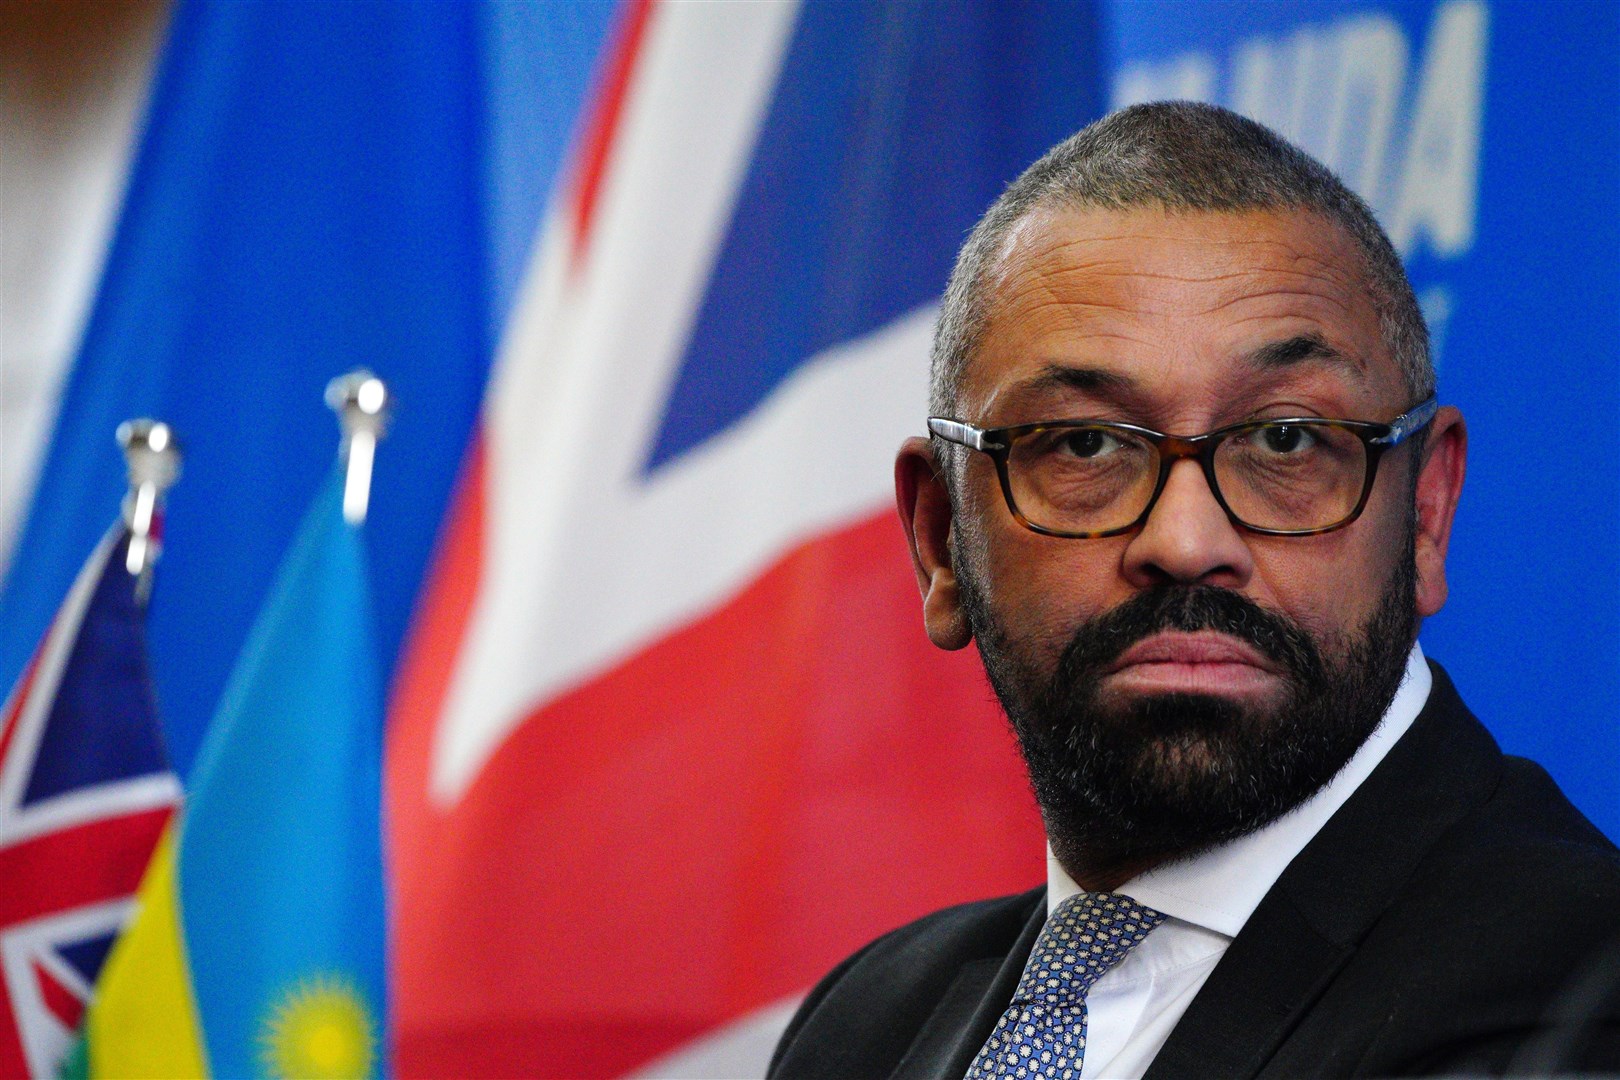 Home Secretary James Cleverly during a press conference with Rwandan Minister of Foreign Affairs Vincent Biruta on Tuesday (Ben Birchall/PA)